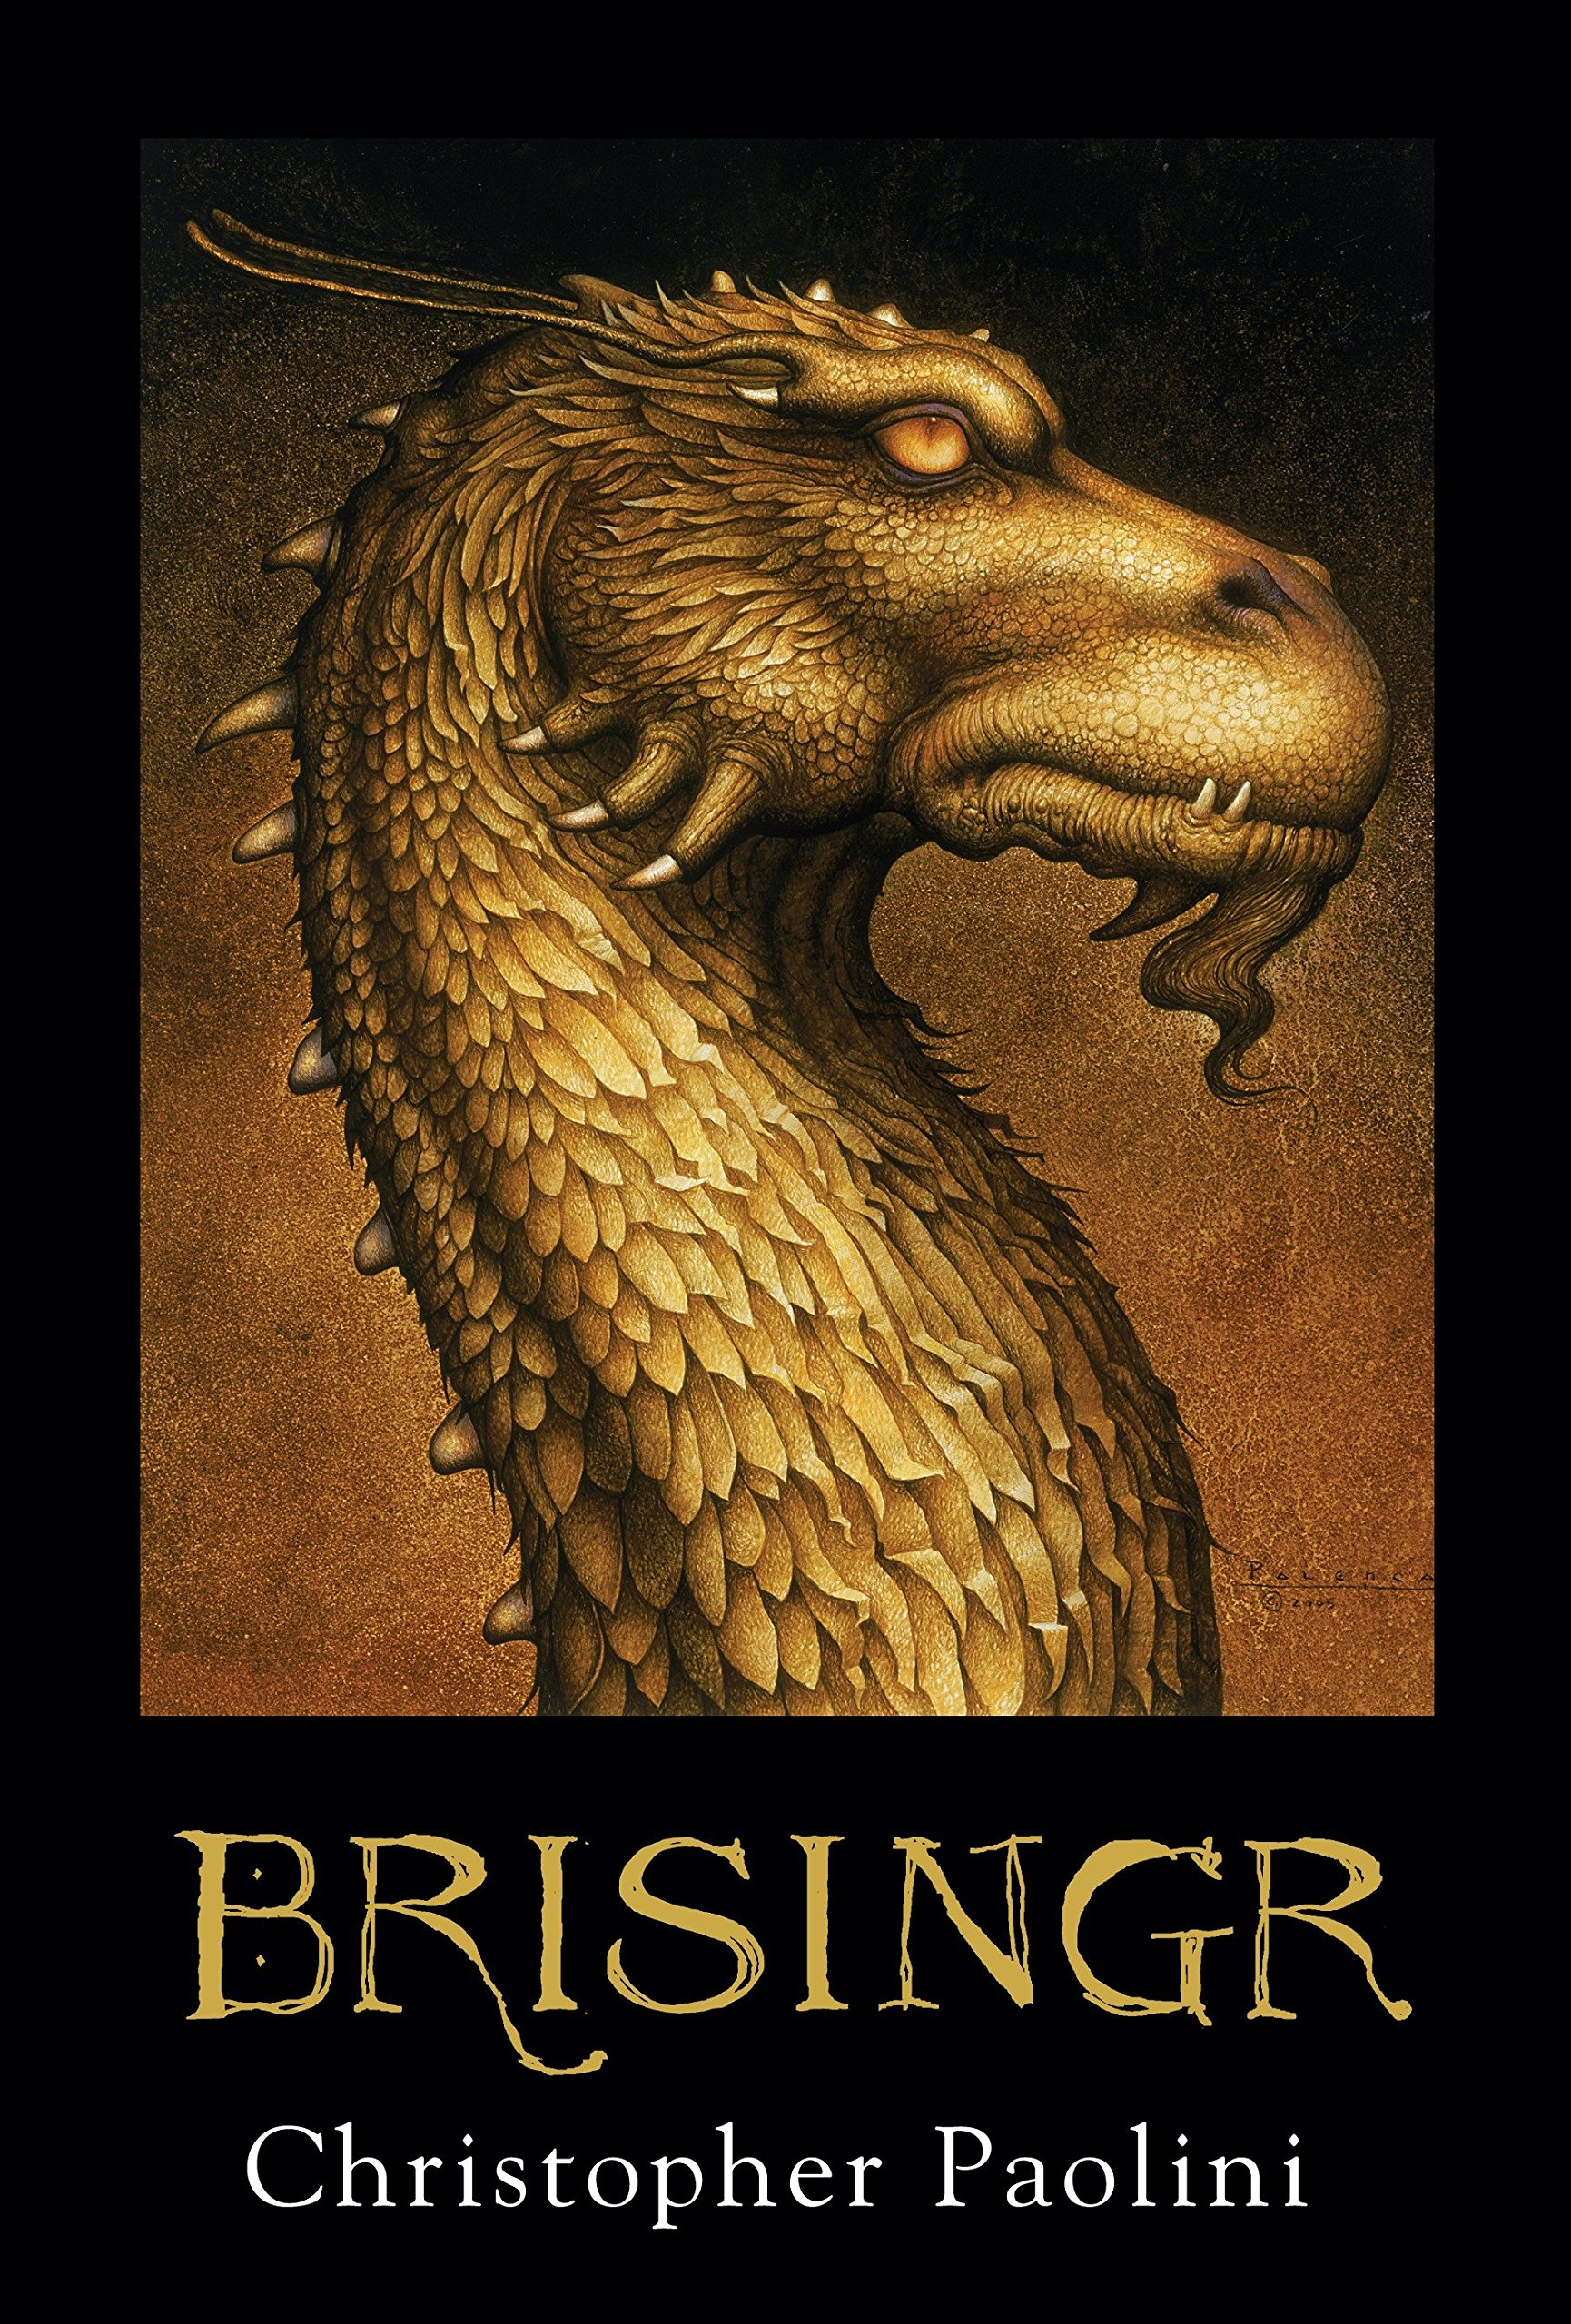 [EPUB] The Inheritance Cycle #3 Brisingr by Christopher Paolini